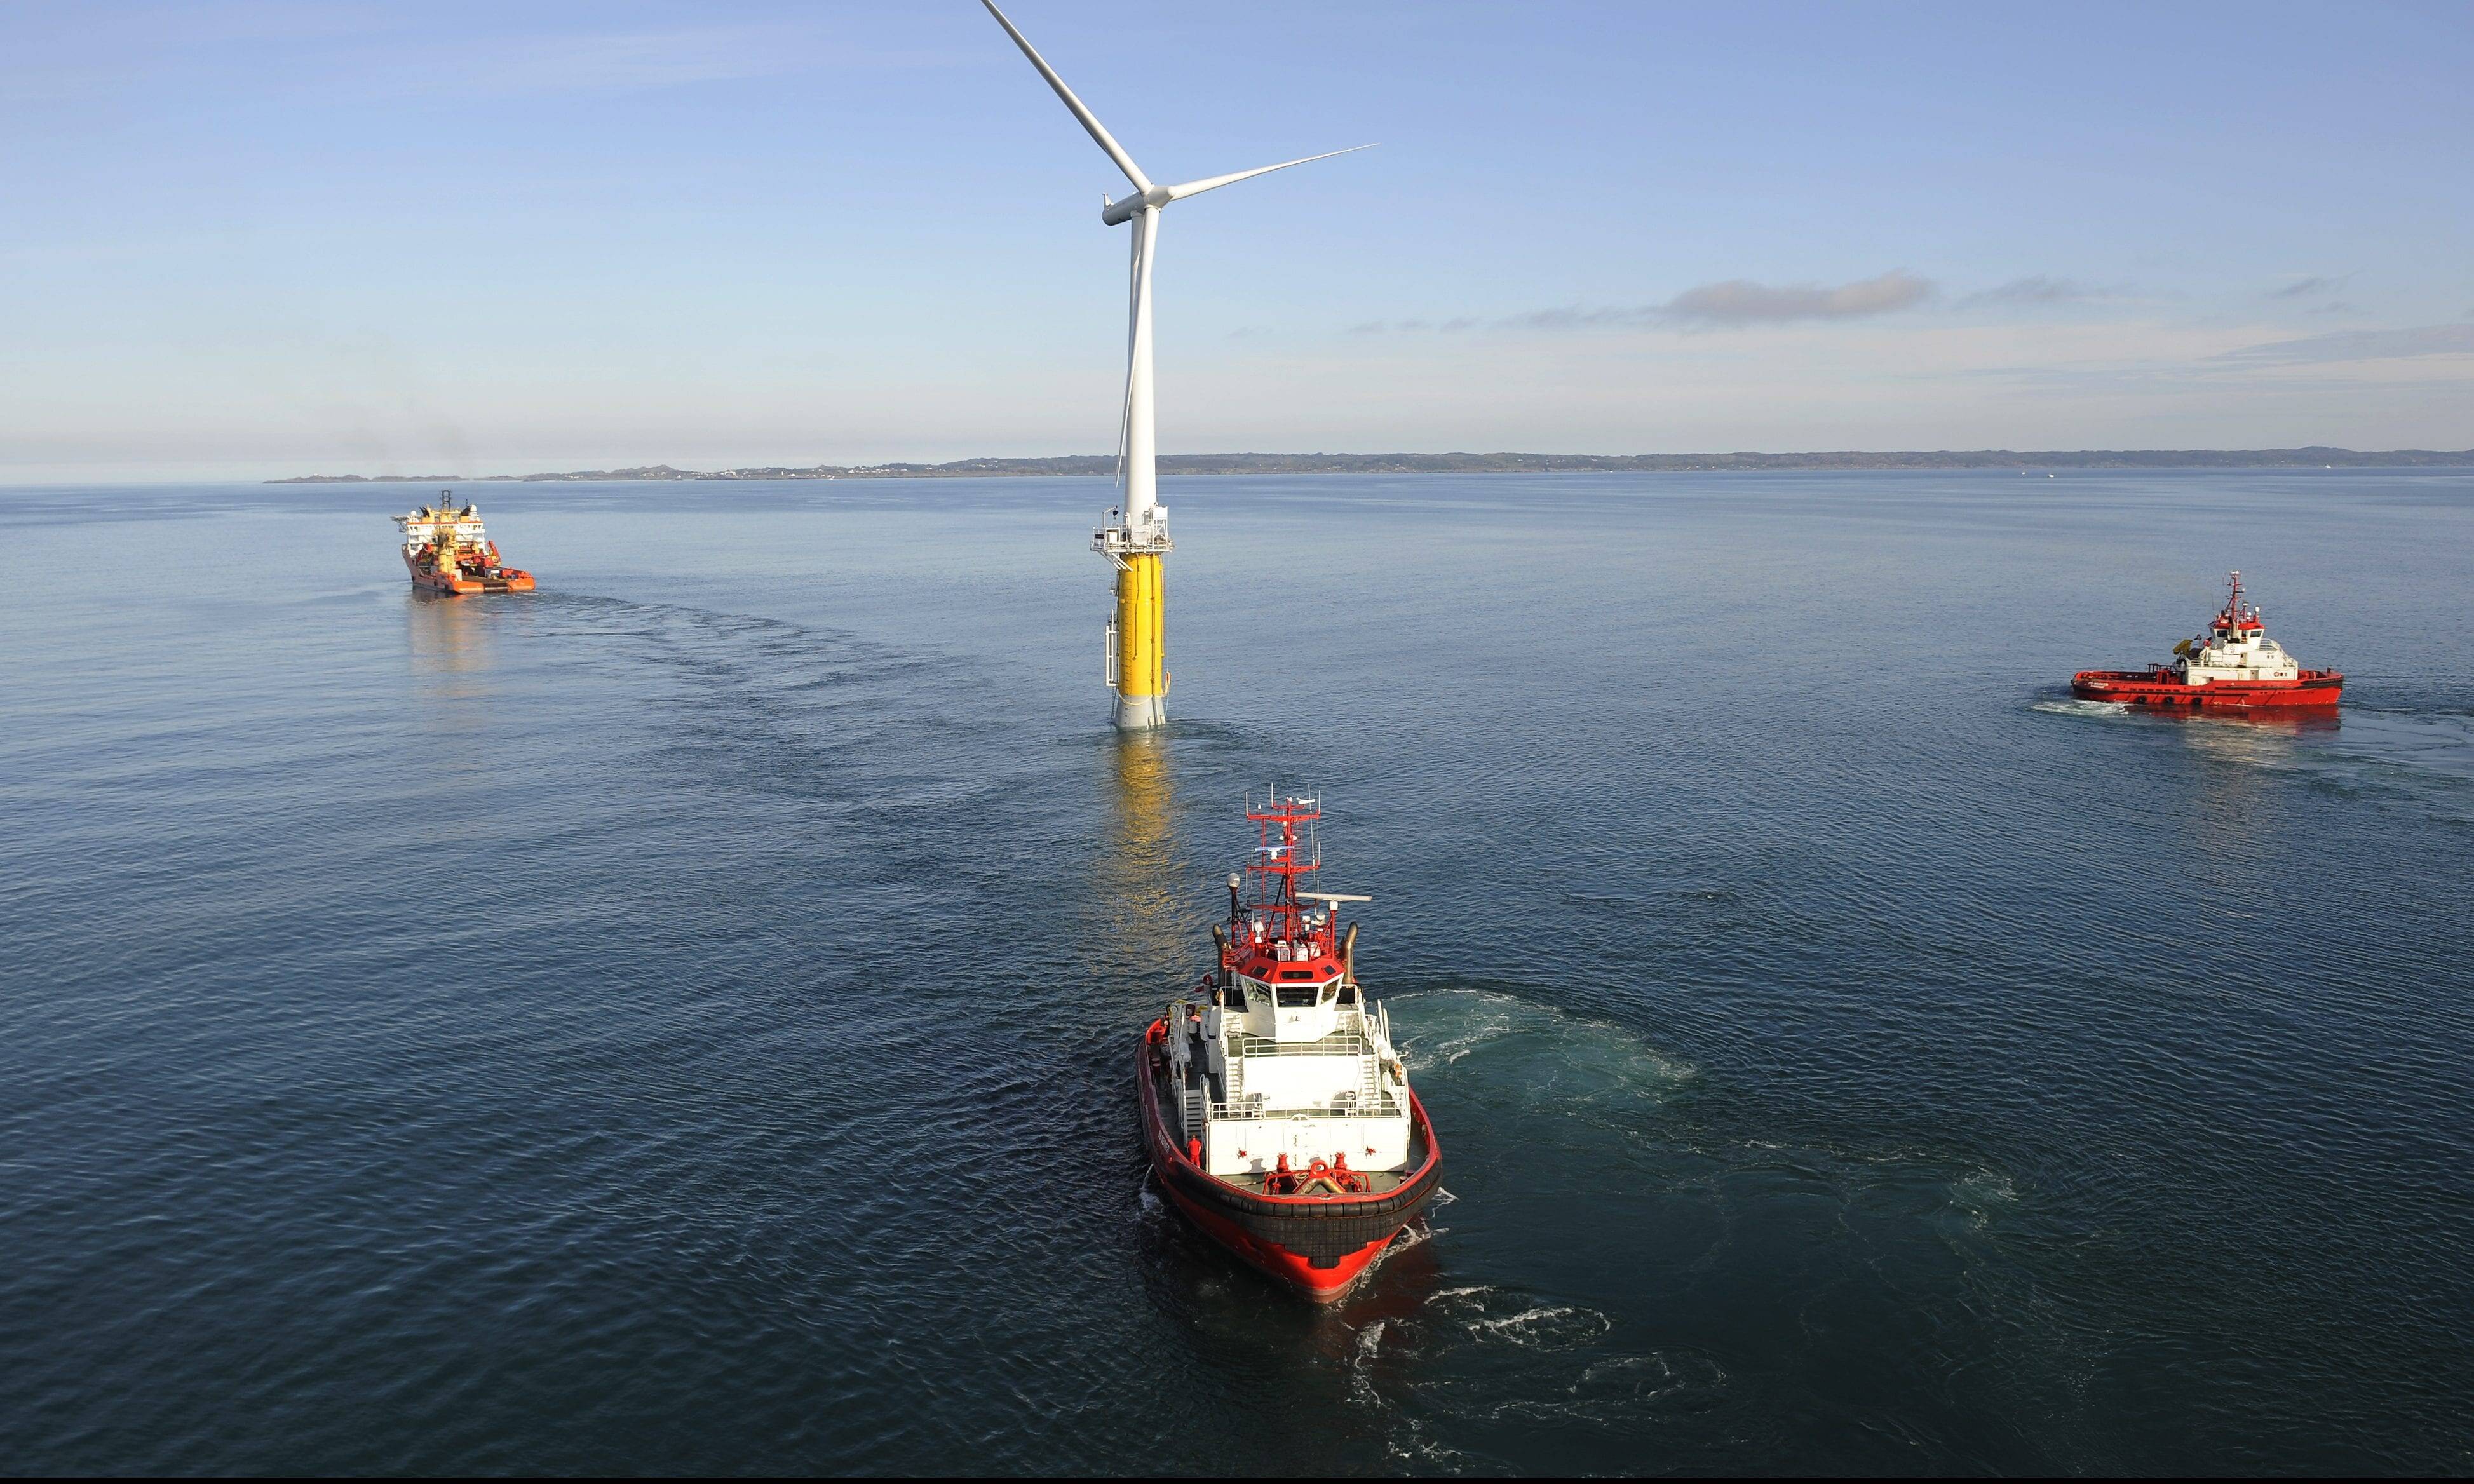 Floating wind capacity could reach 20GW by 2050